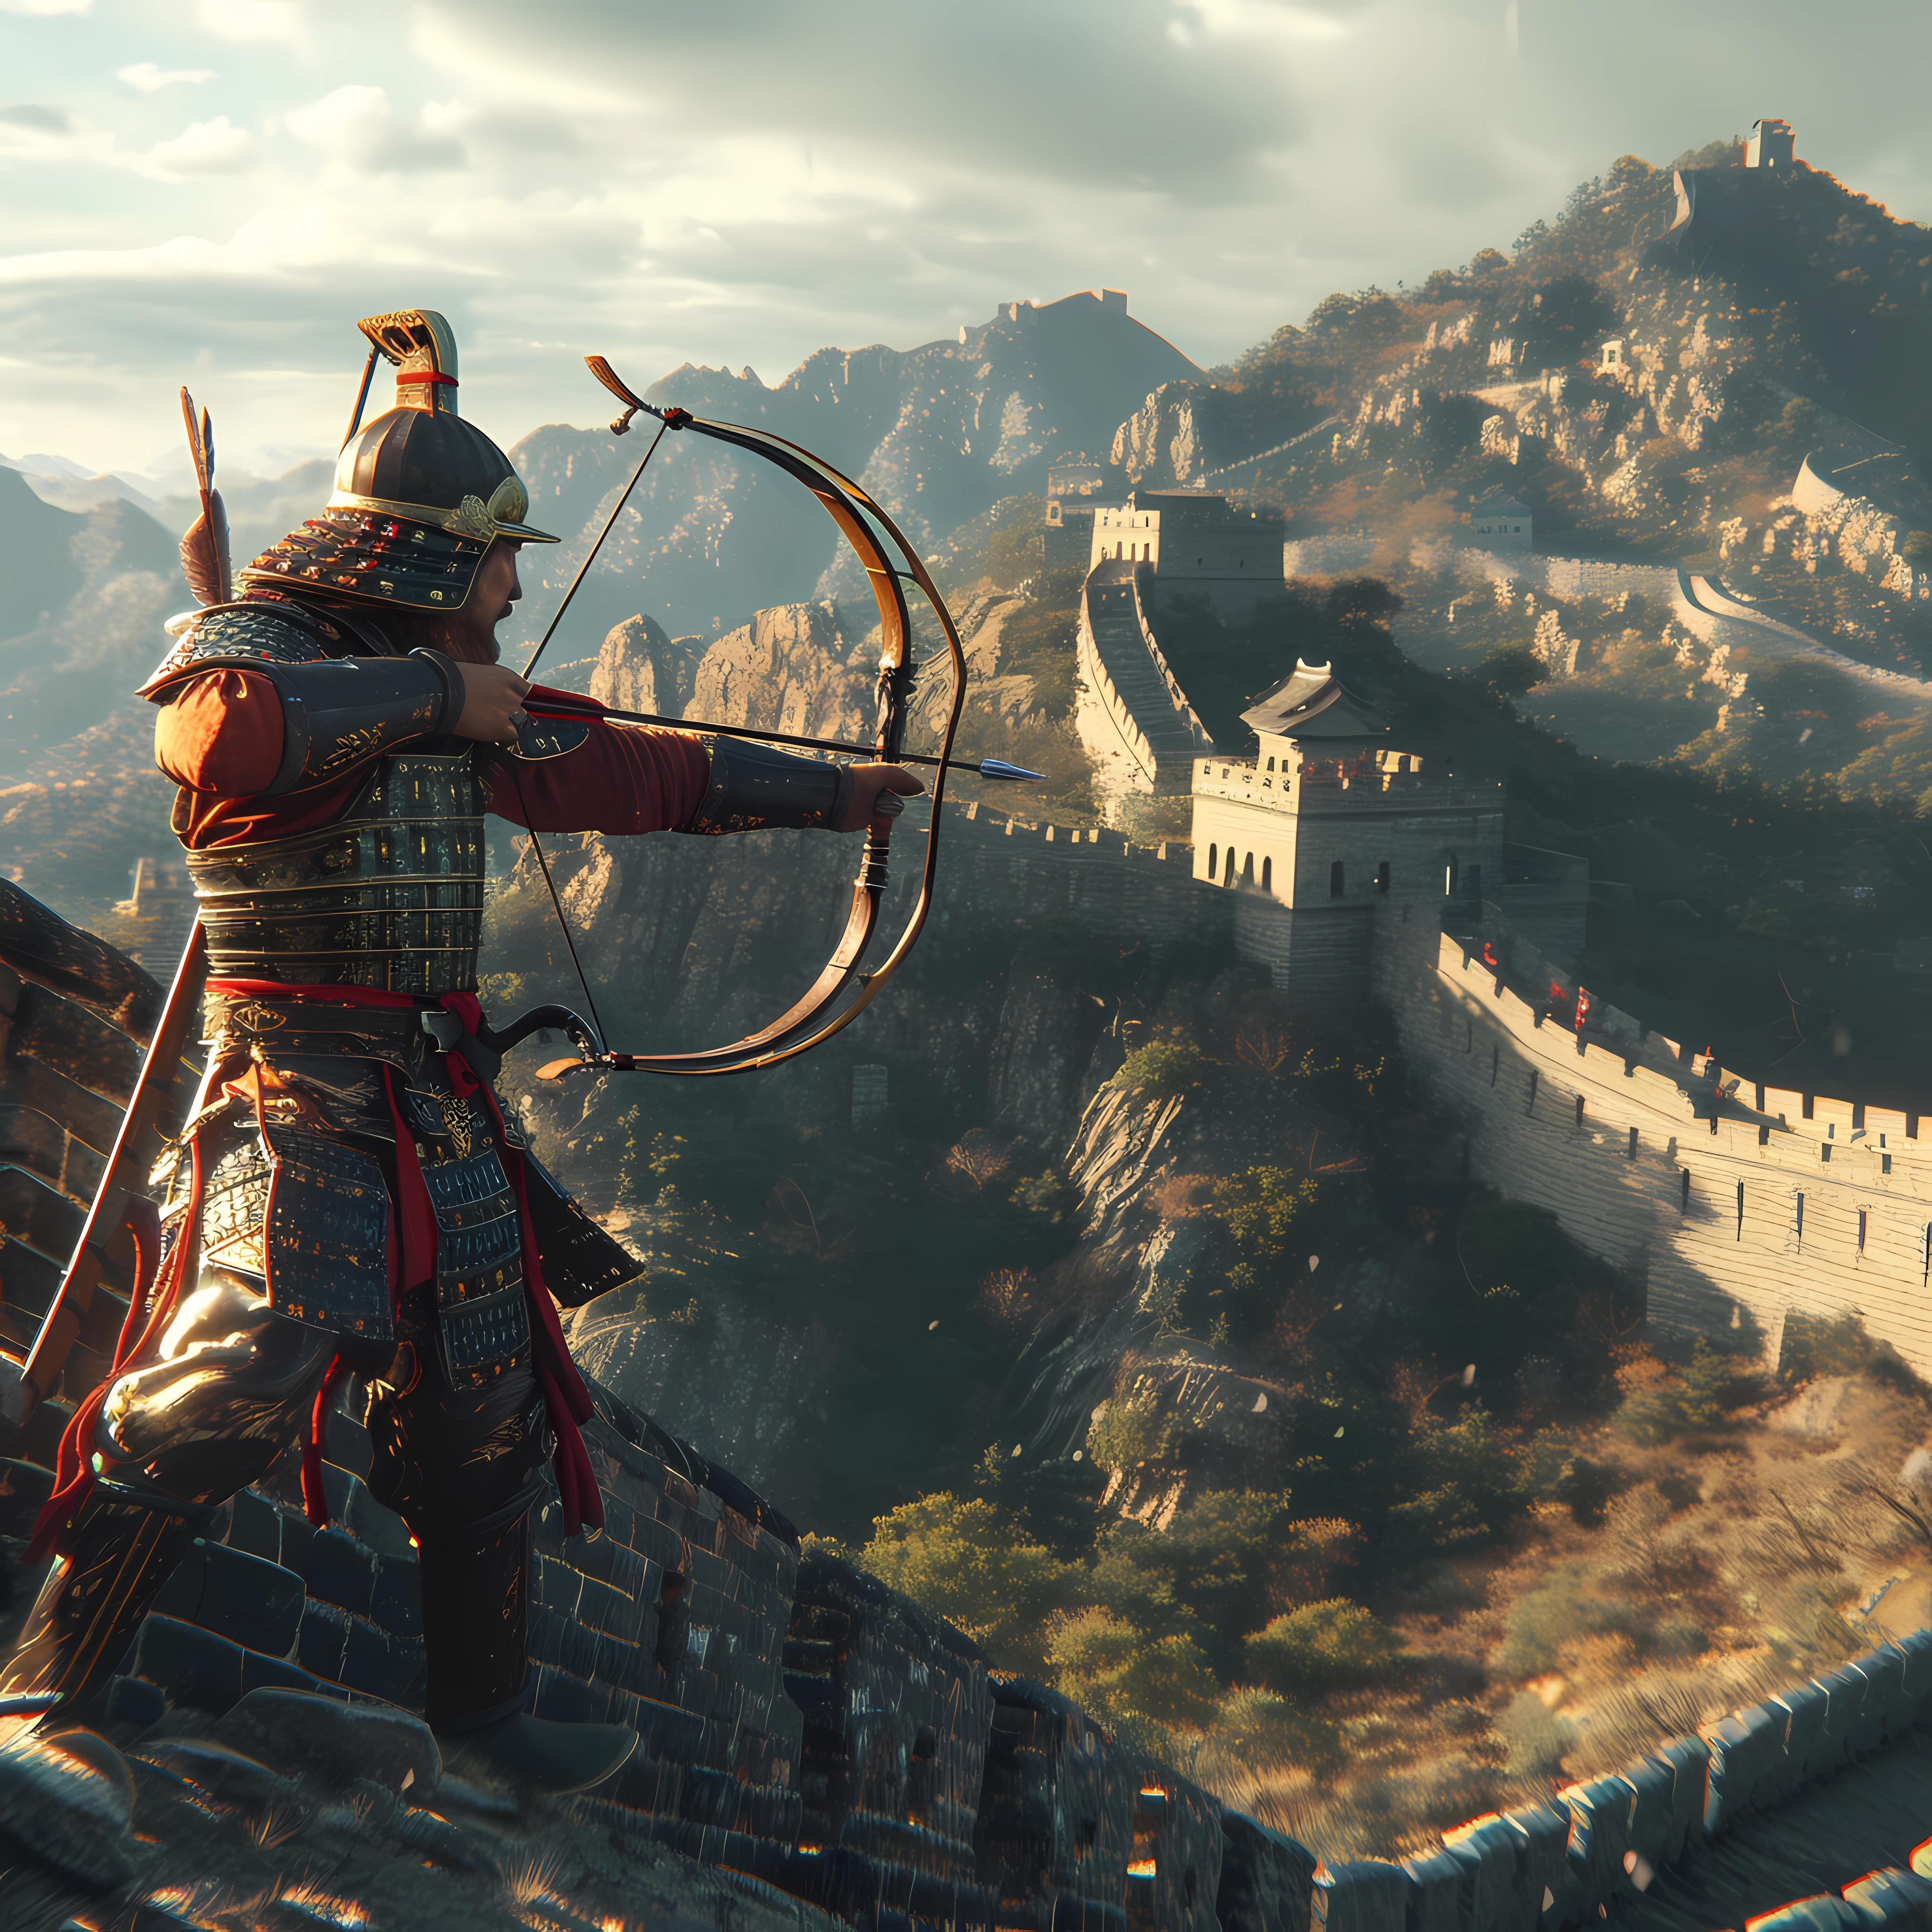 Fantasy archer in historical armor standing on the Great Wall of China, avatar image.